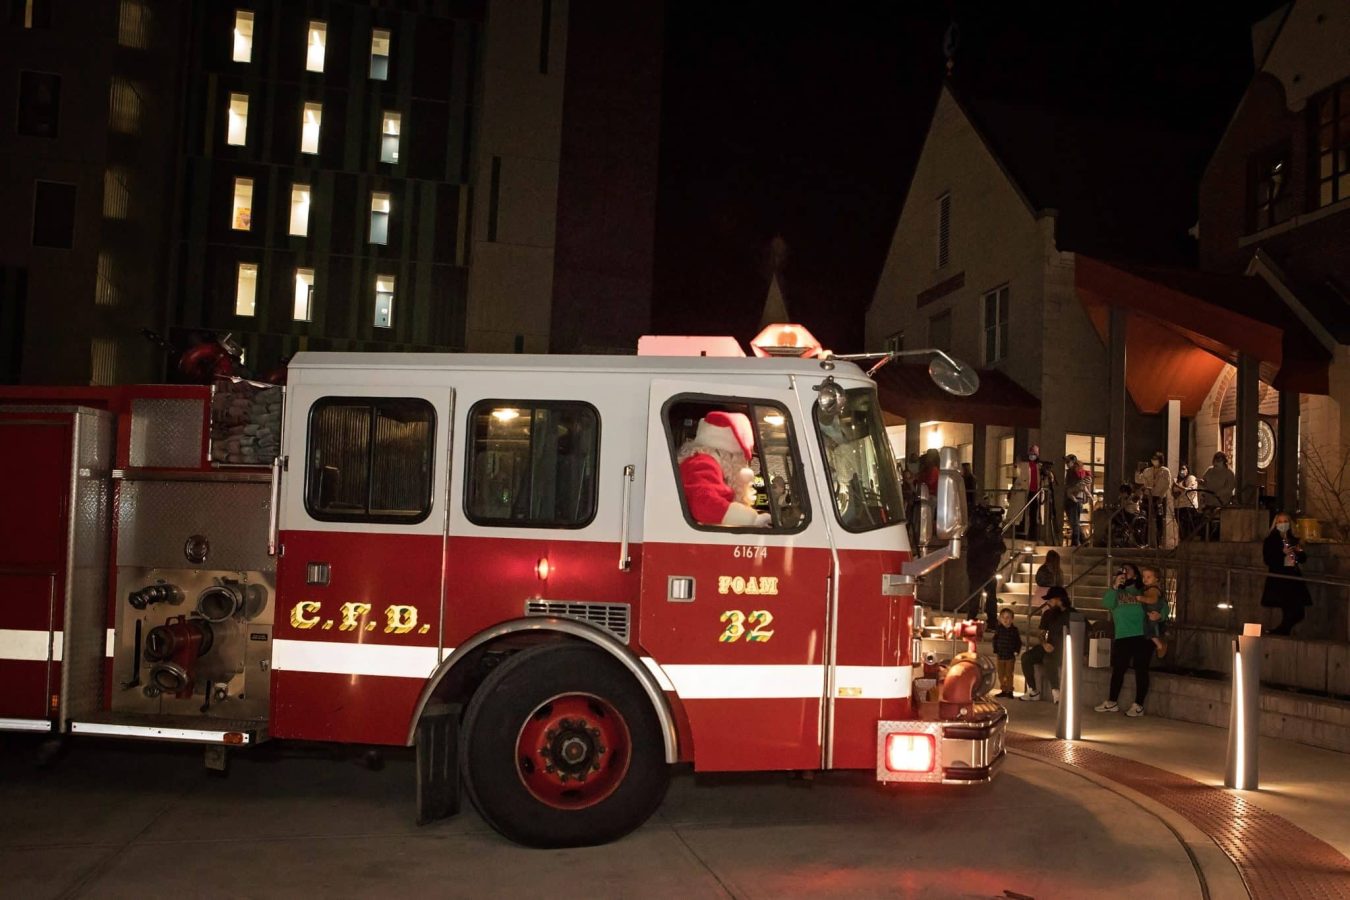 Image from Comfort and Joy - Santa inside a firetruck